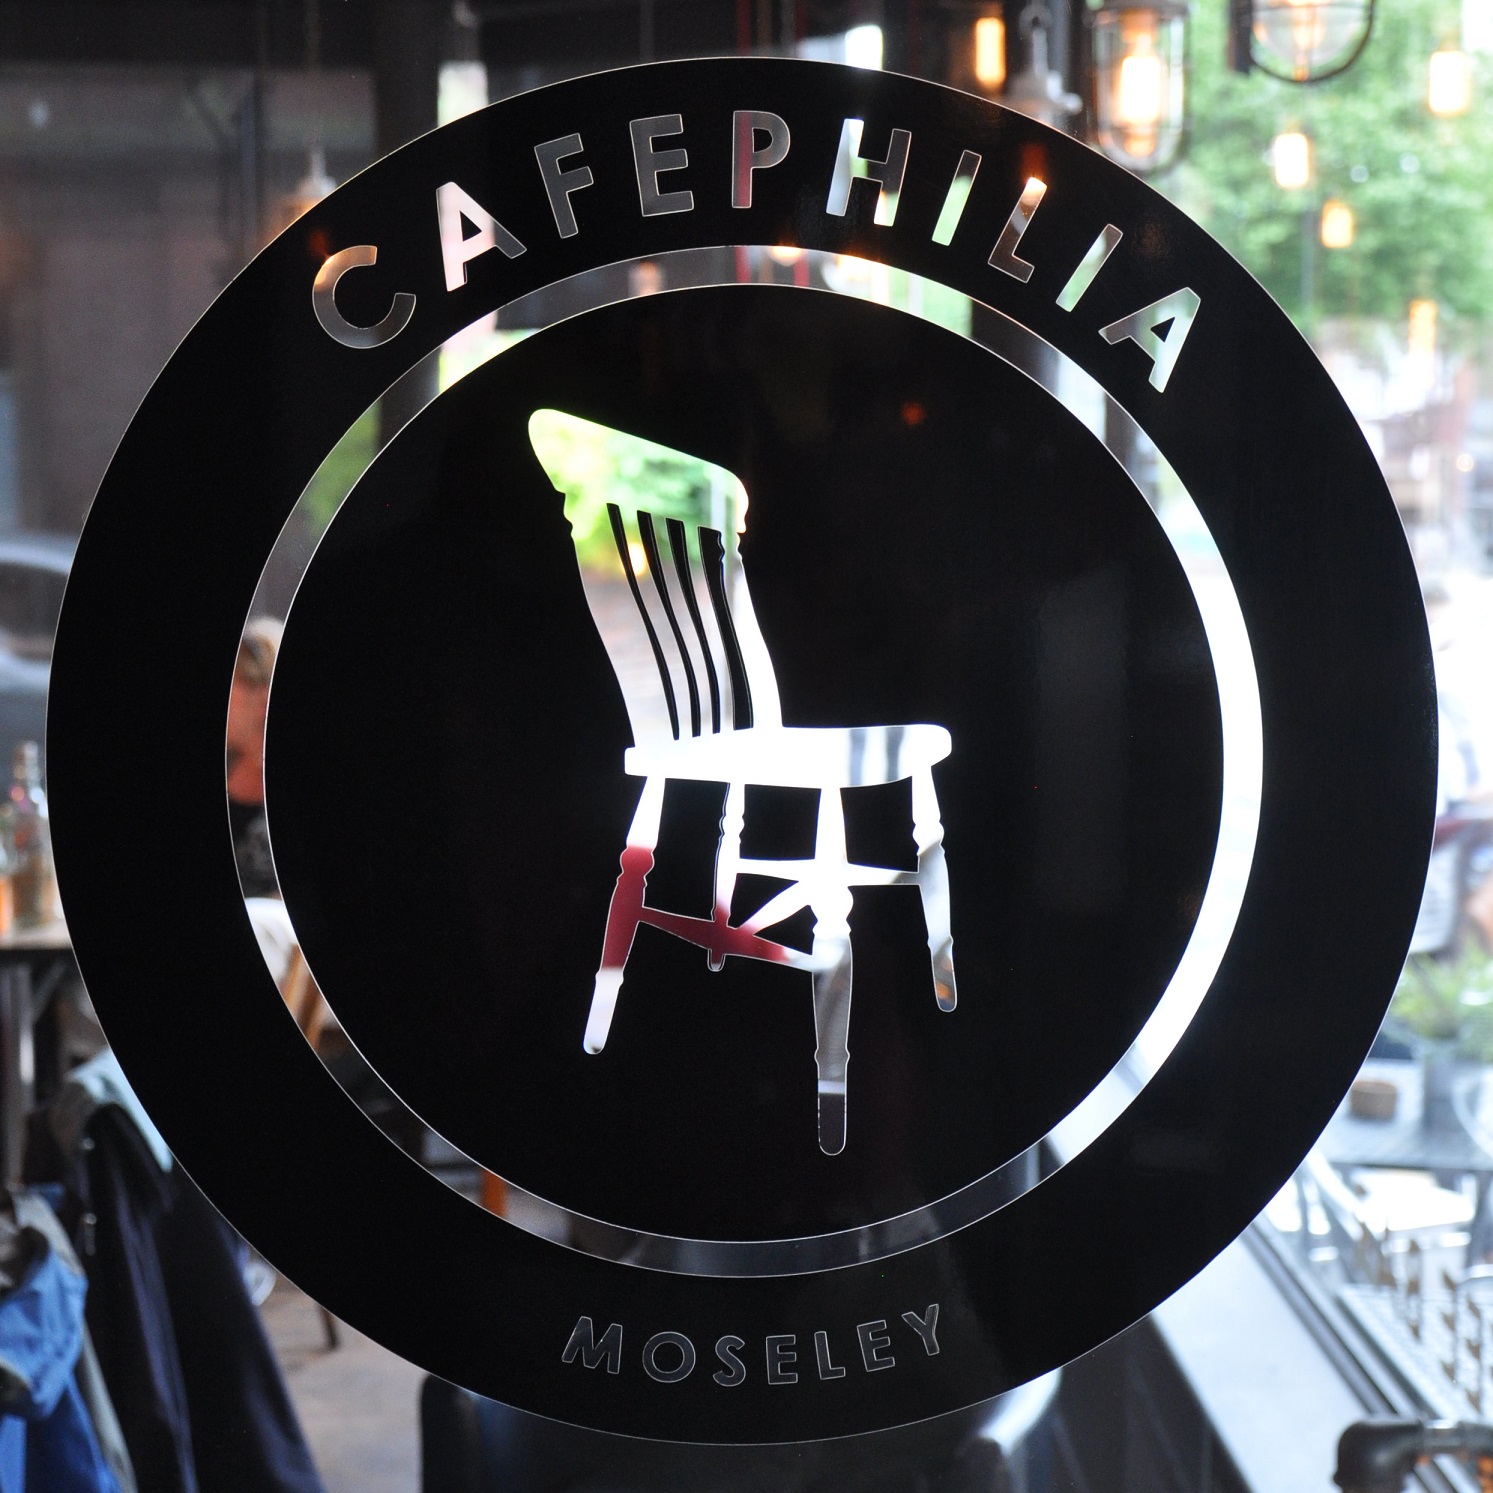 A black circle, with a clear dining room chair in the centre. "Cafephilia" is written at the top of the circle and "Moseley" is written at the bottom.